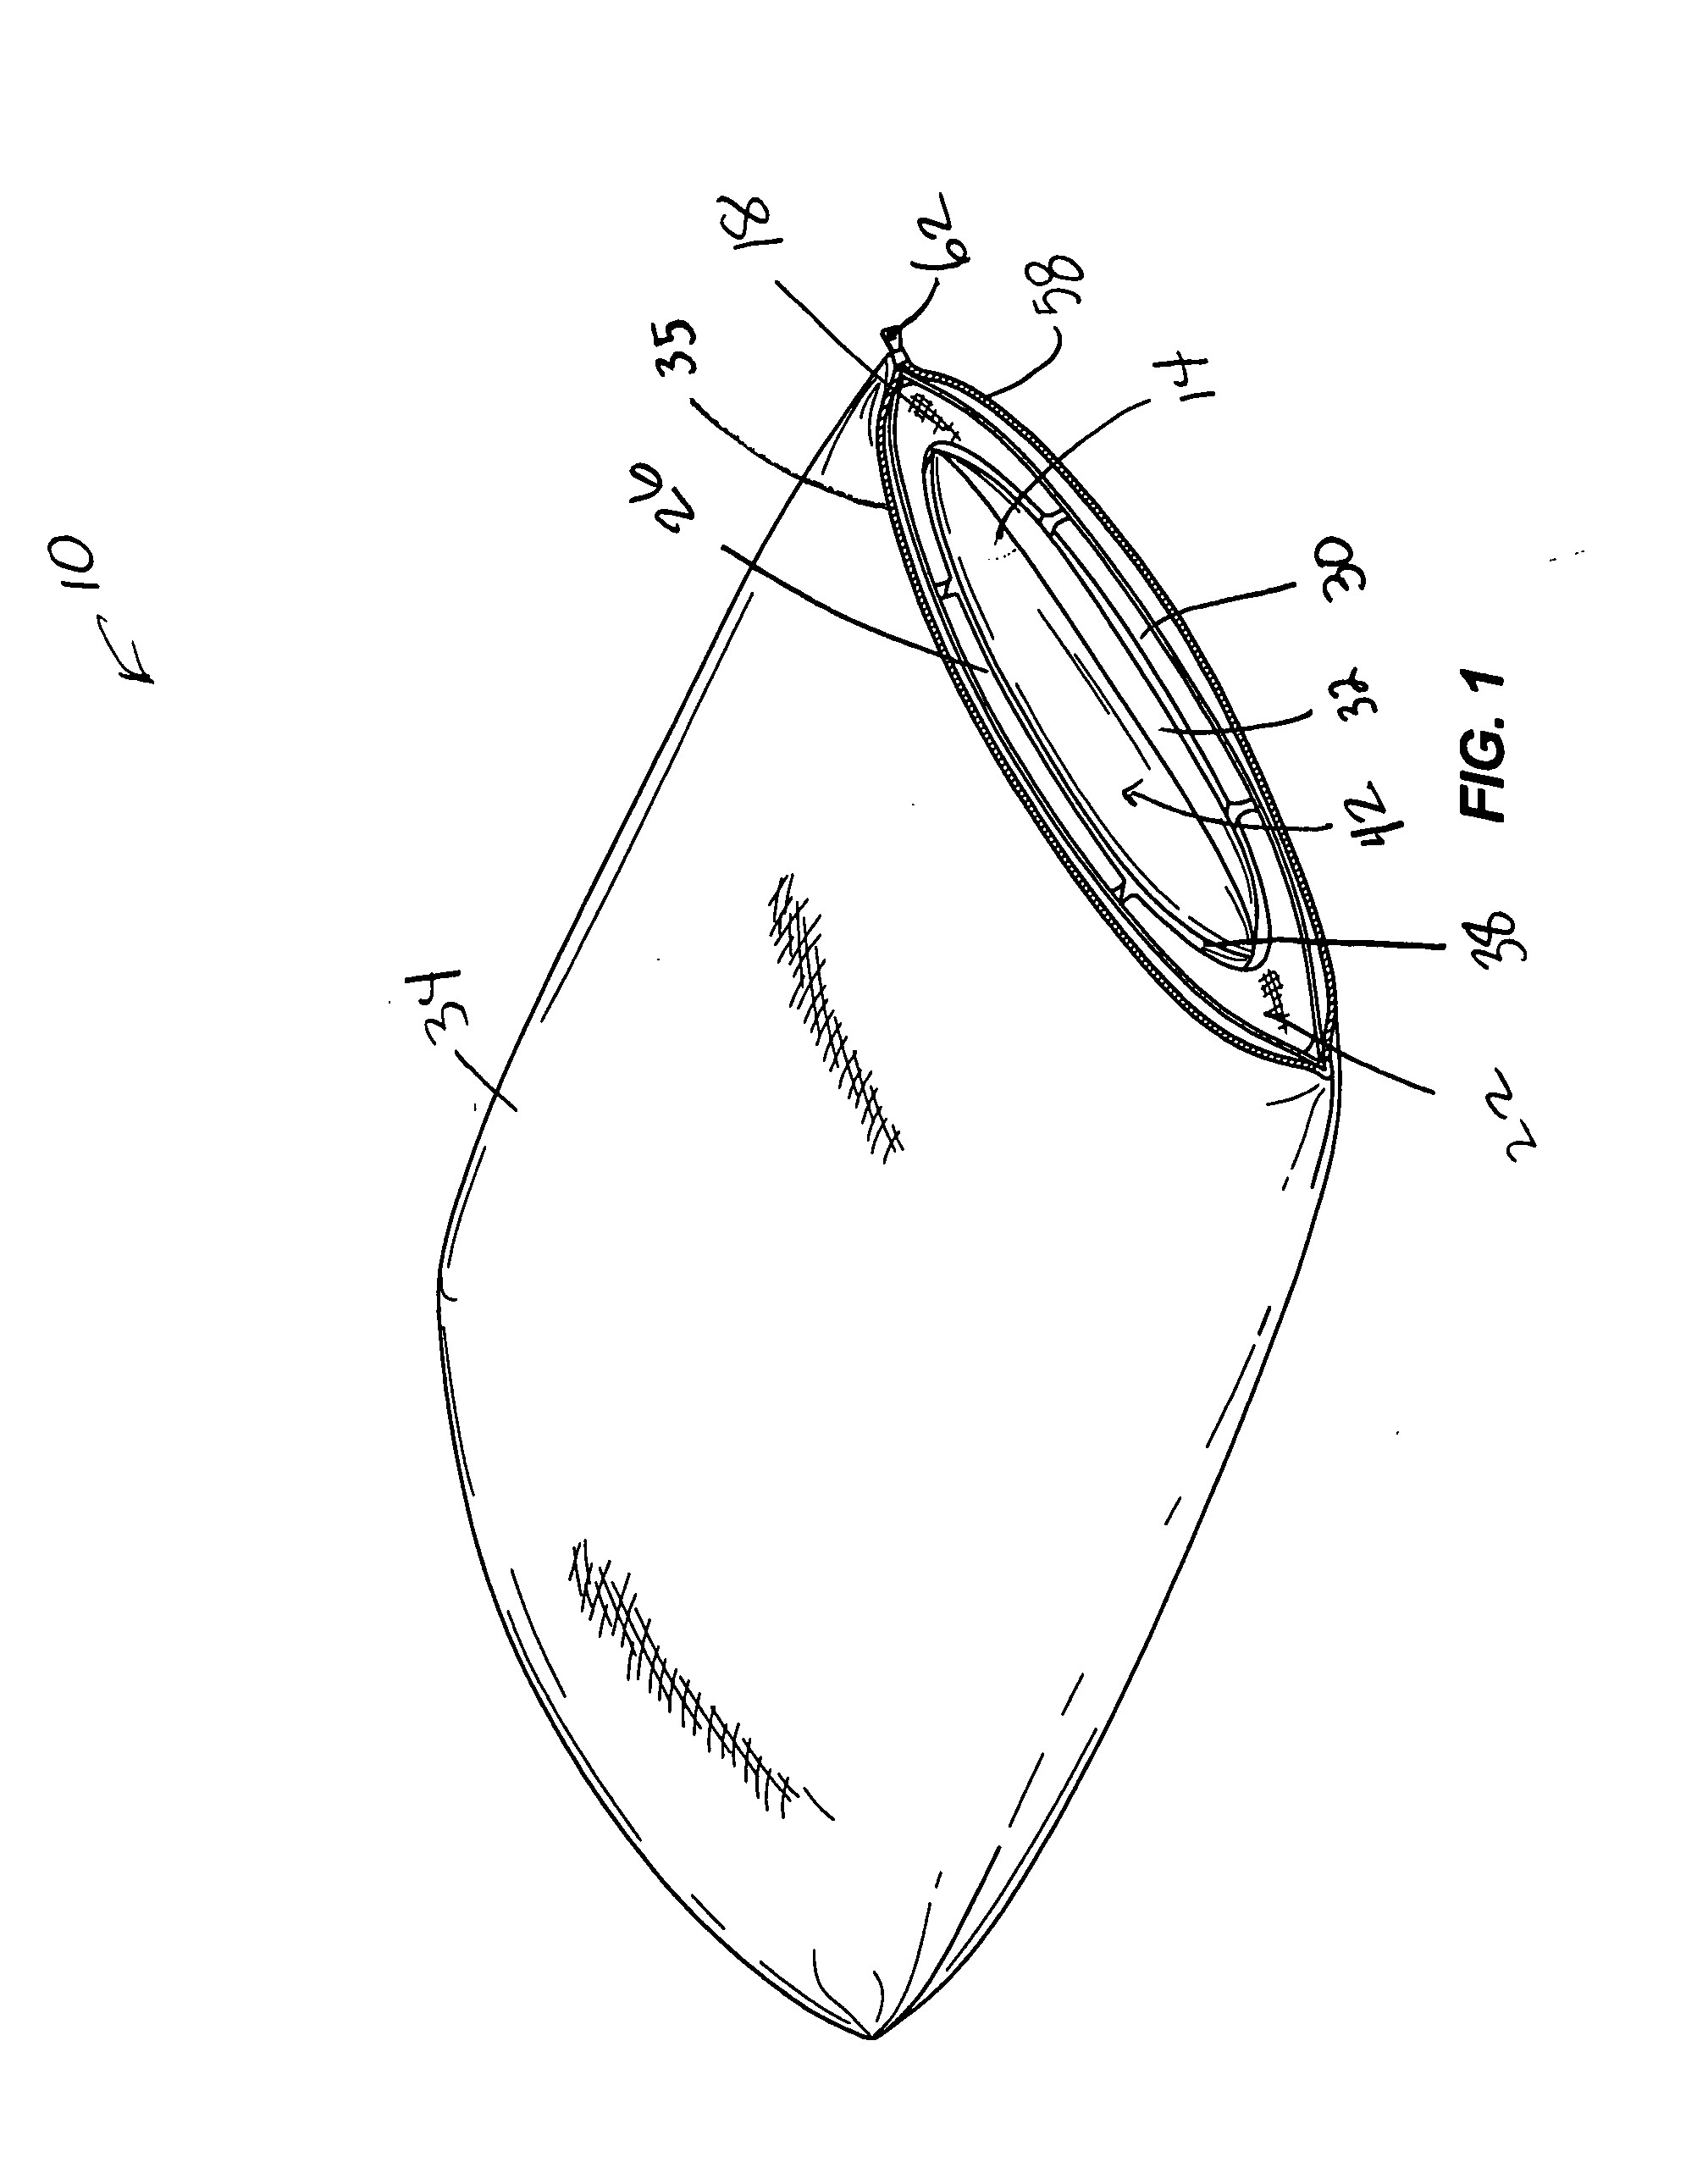 Multi-component pillow and method of manufacturing and assembling same